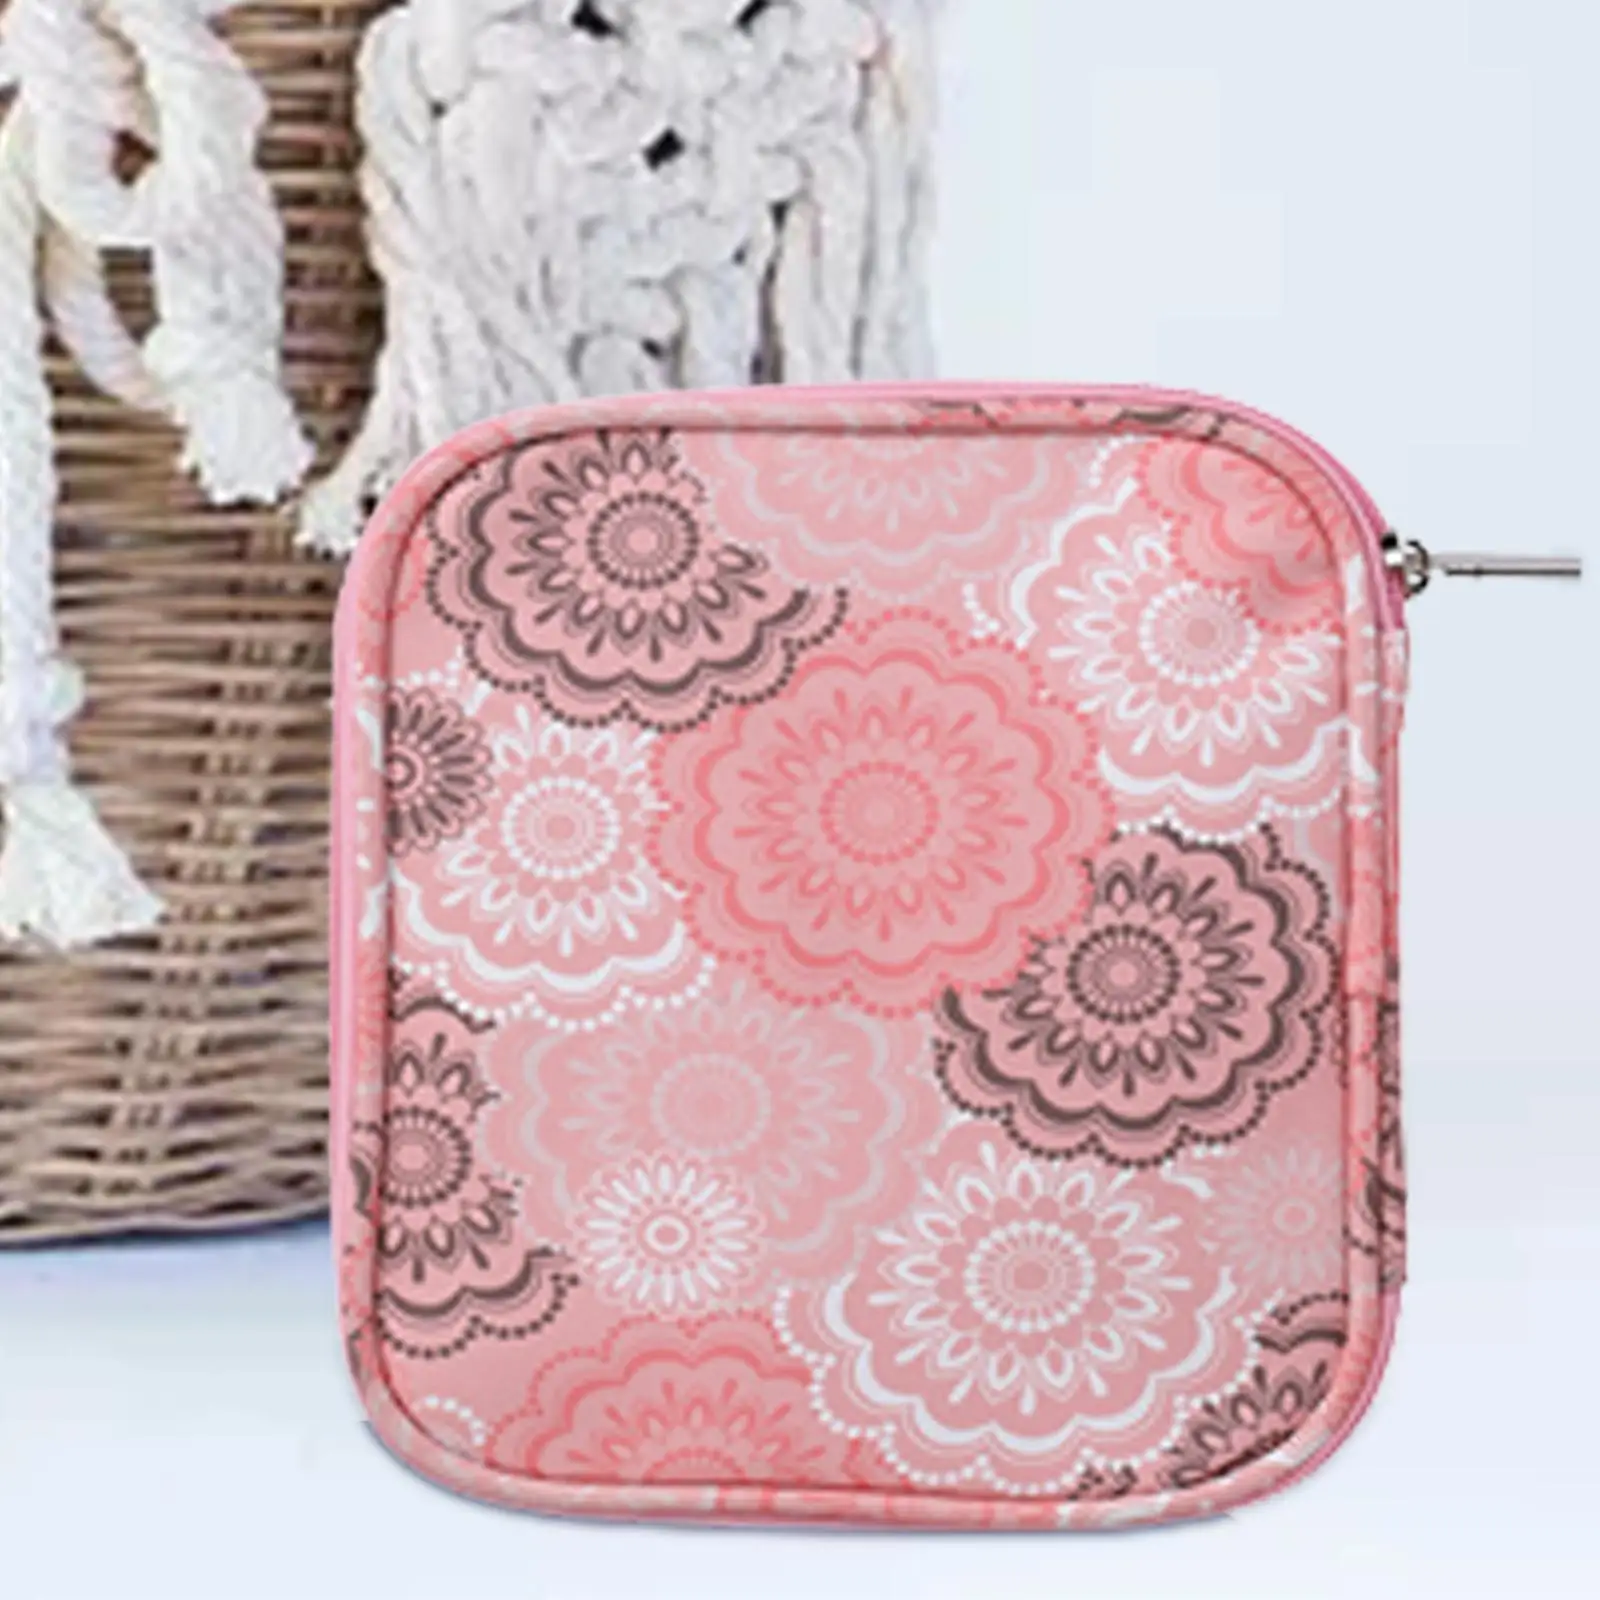 Knitting Needles Storage Bag Durable with Zipper for Needles Scissors Travel Crochet Accessories Double Layers Crochet Hook Case